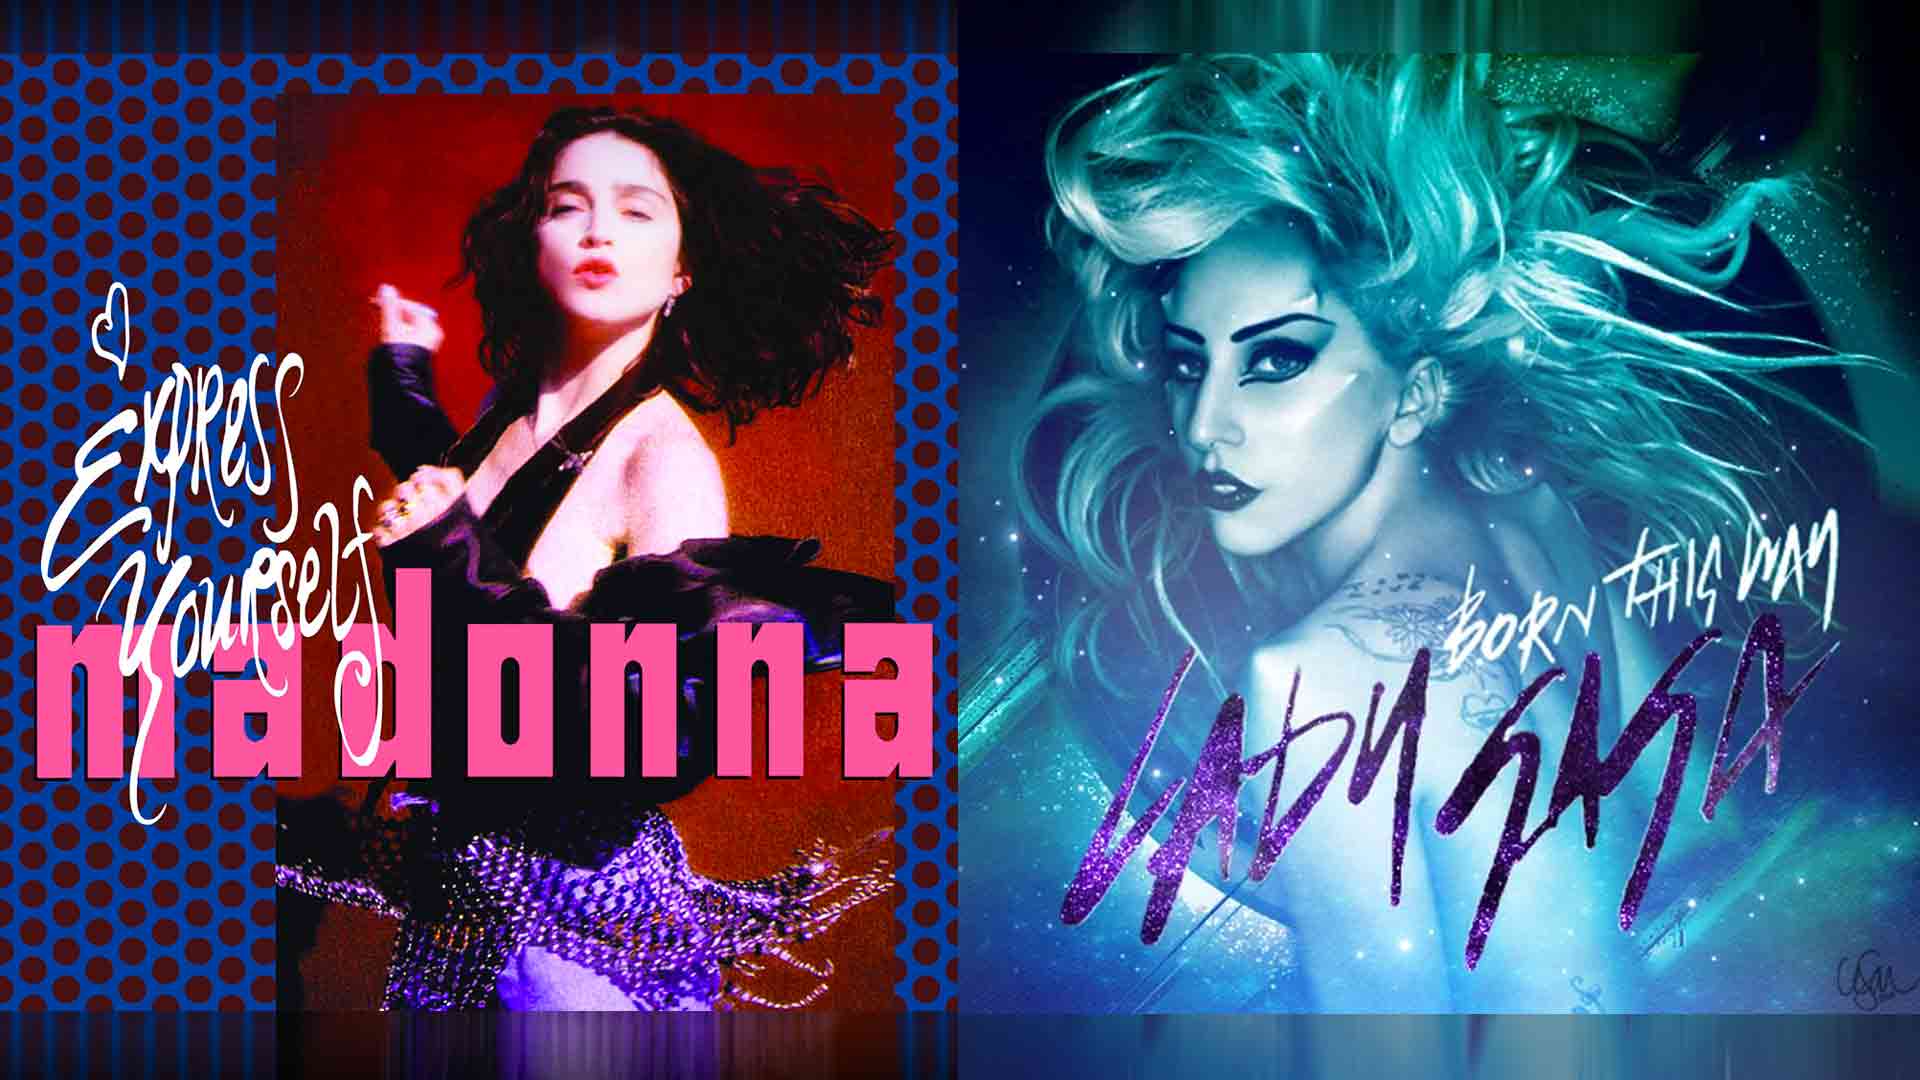 Lady Gaga's "Born This Way" Rips Off Madonna's "Express Yourself" - So What?